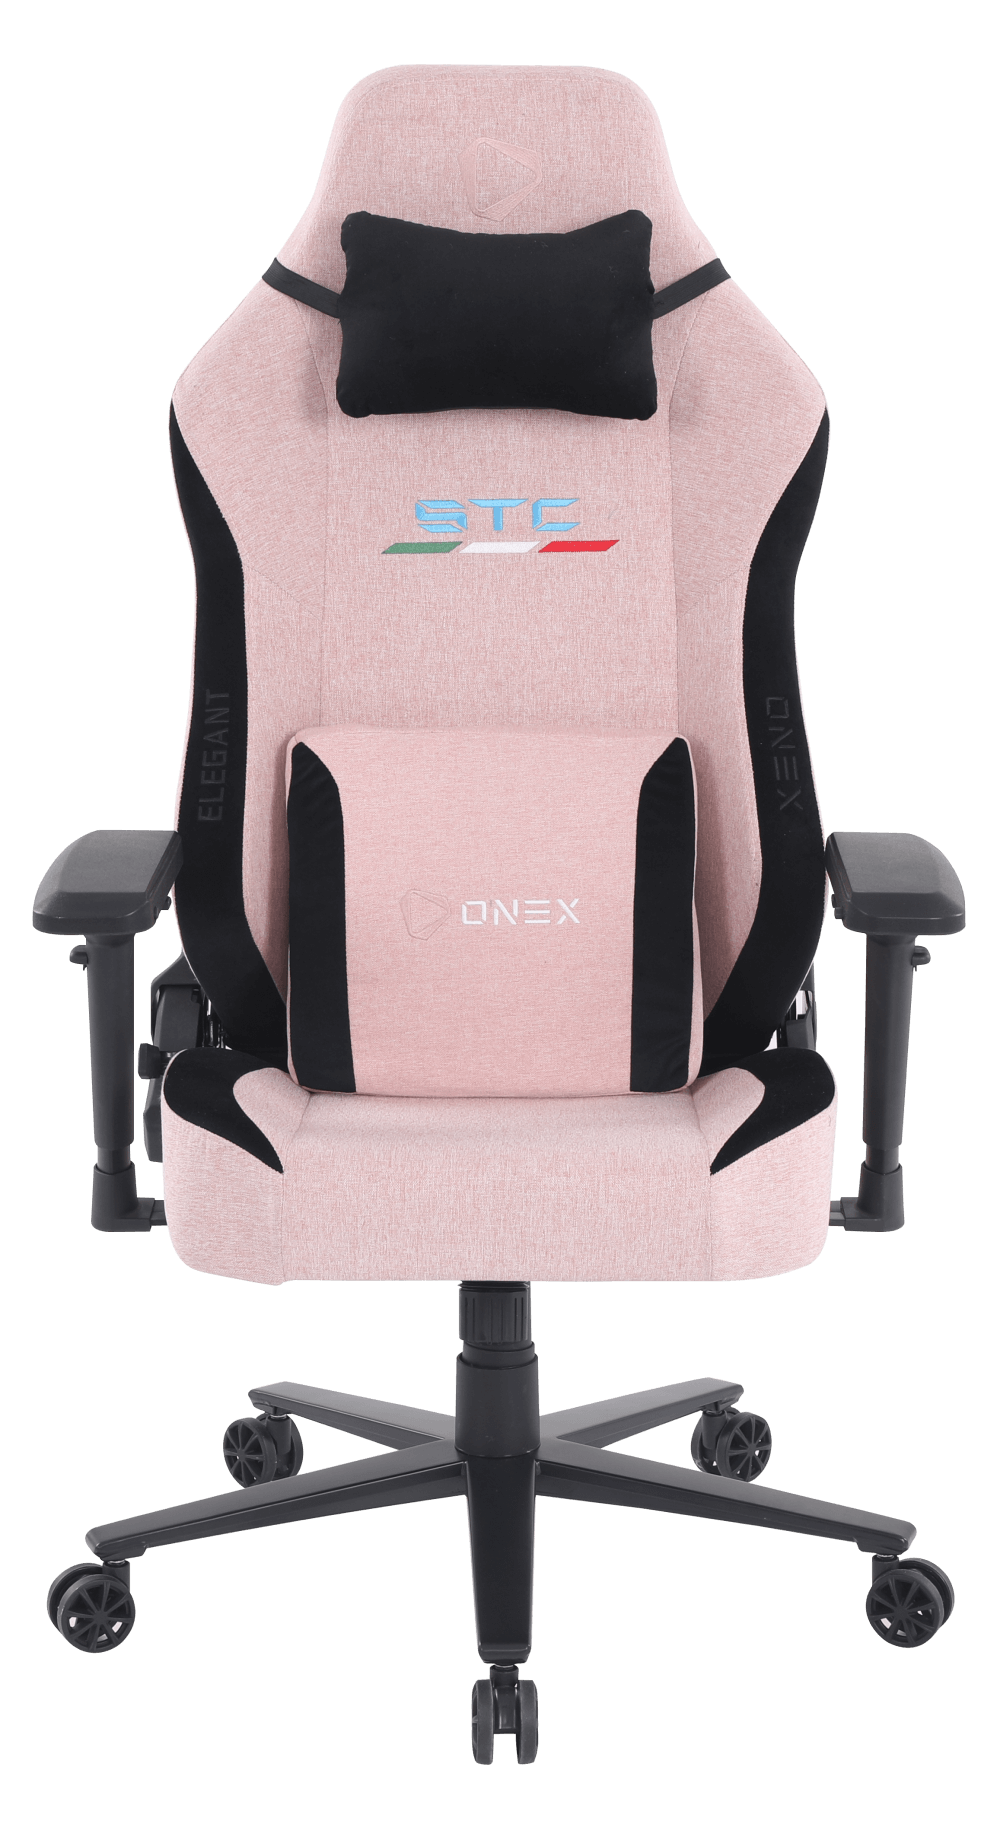  ONEX-STC ELEGANT Gaming /Office Chair - Pink<BR><fONT COLOR='RED'>In-Store Pickup Not Available - Delivery Only (Freight Charges Apply)  